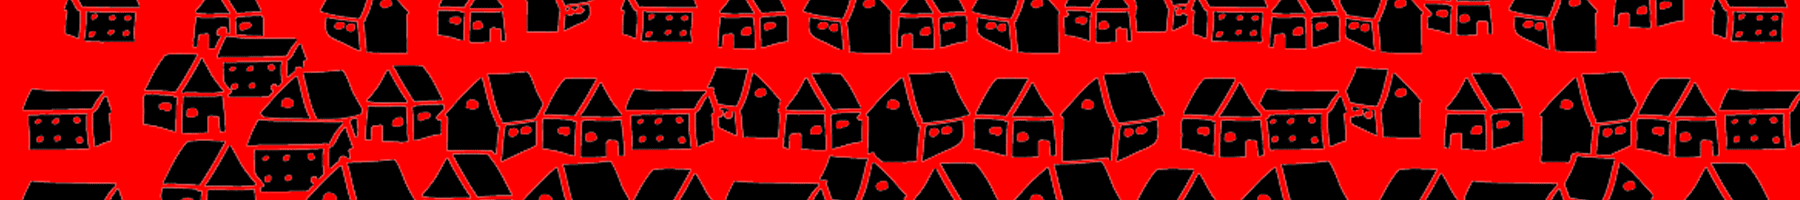 Small black houses drawn on a red background